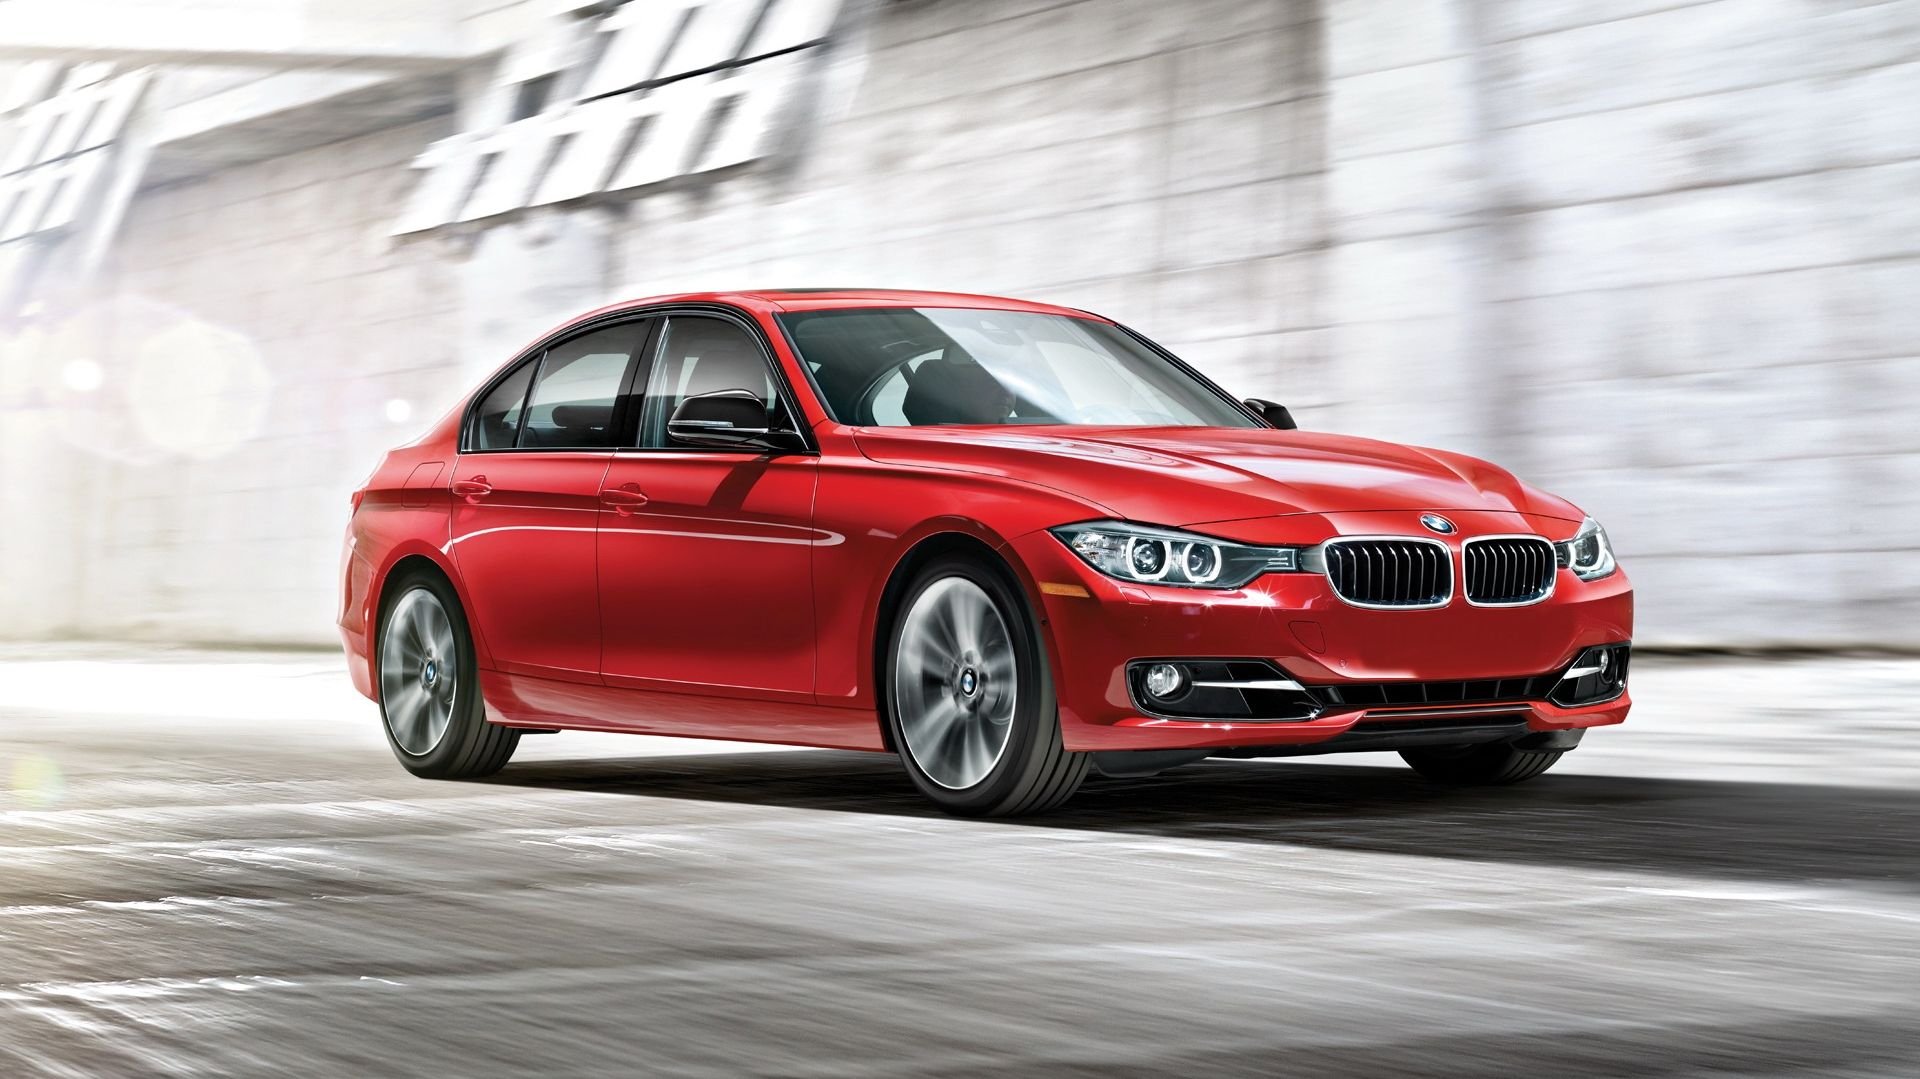  BMW is apparently looking into releasing an M-Performance version of the 3 Series named the M340i, 